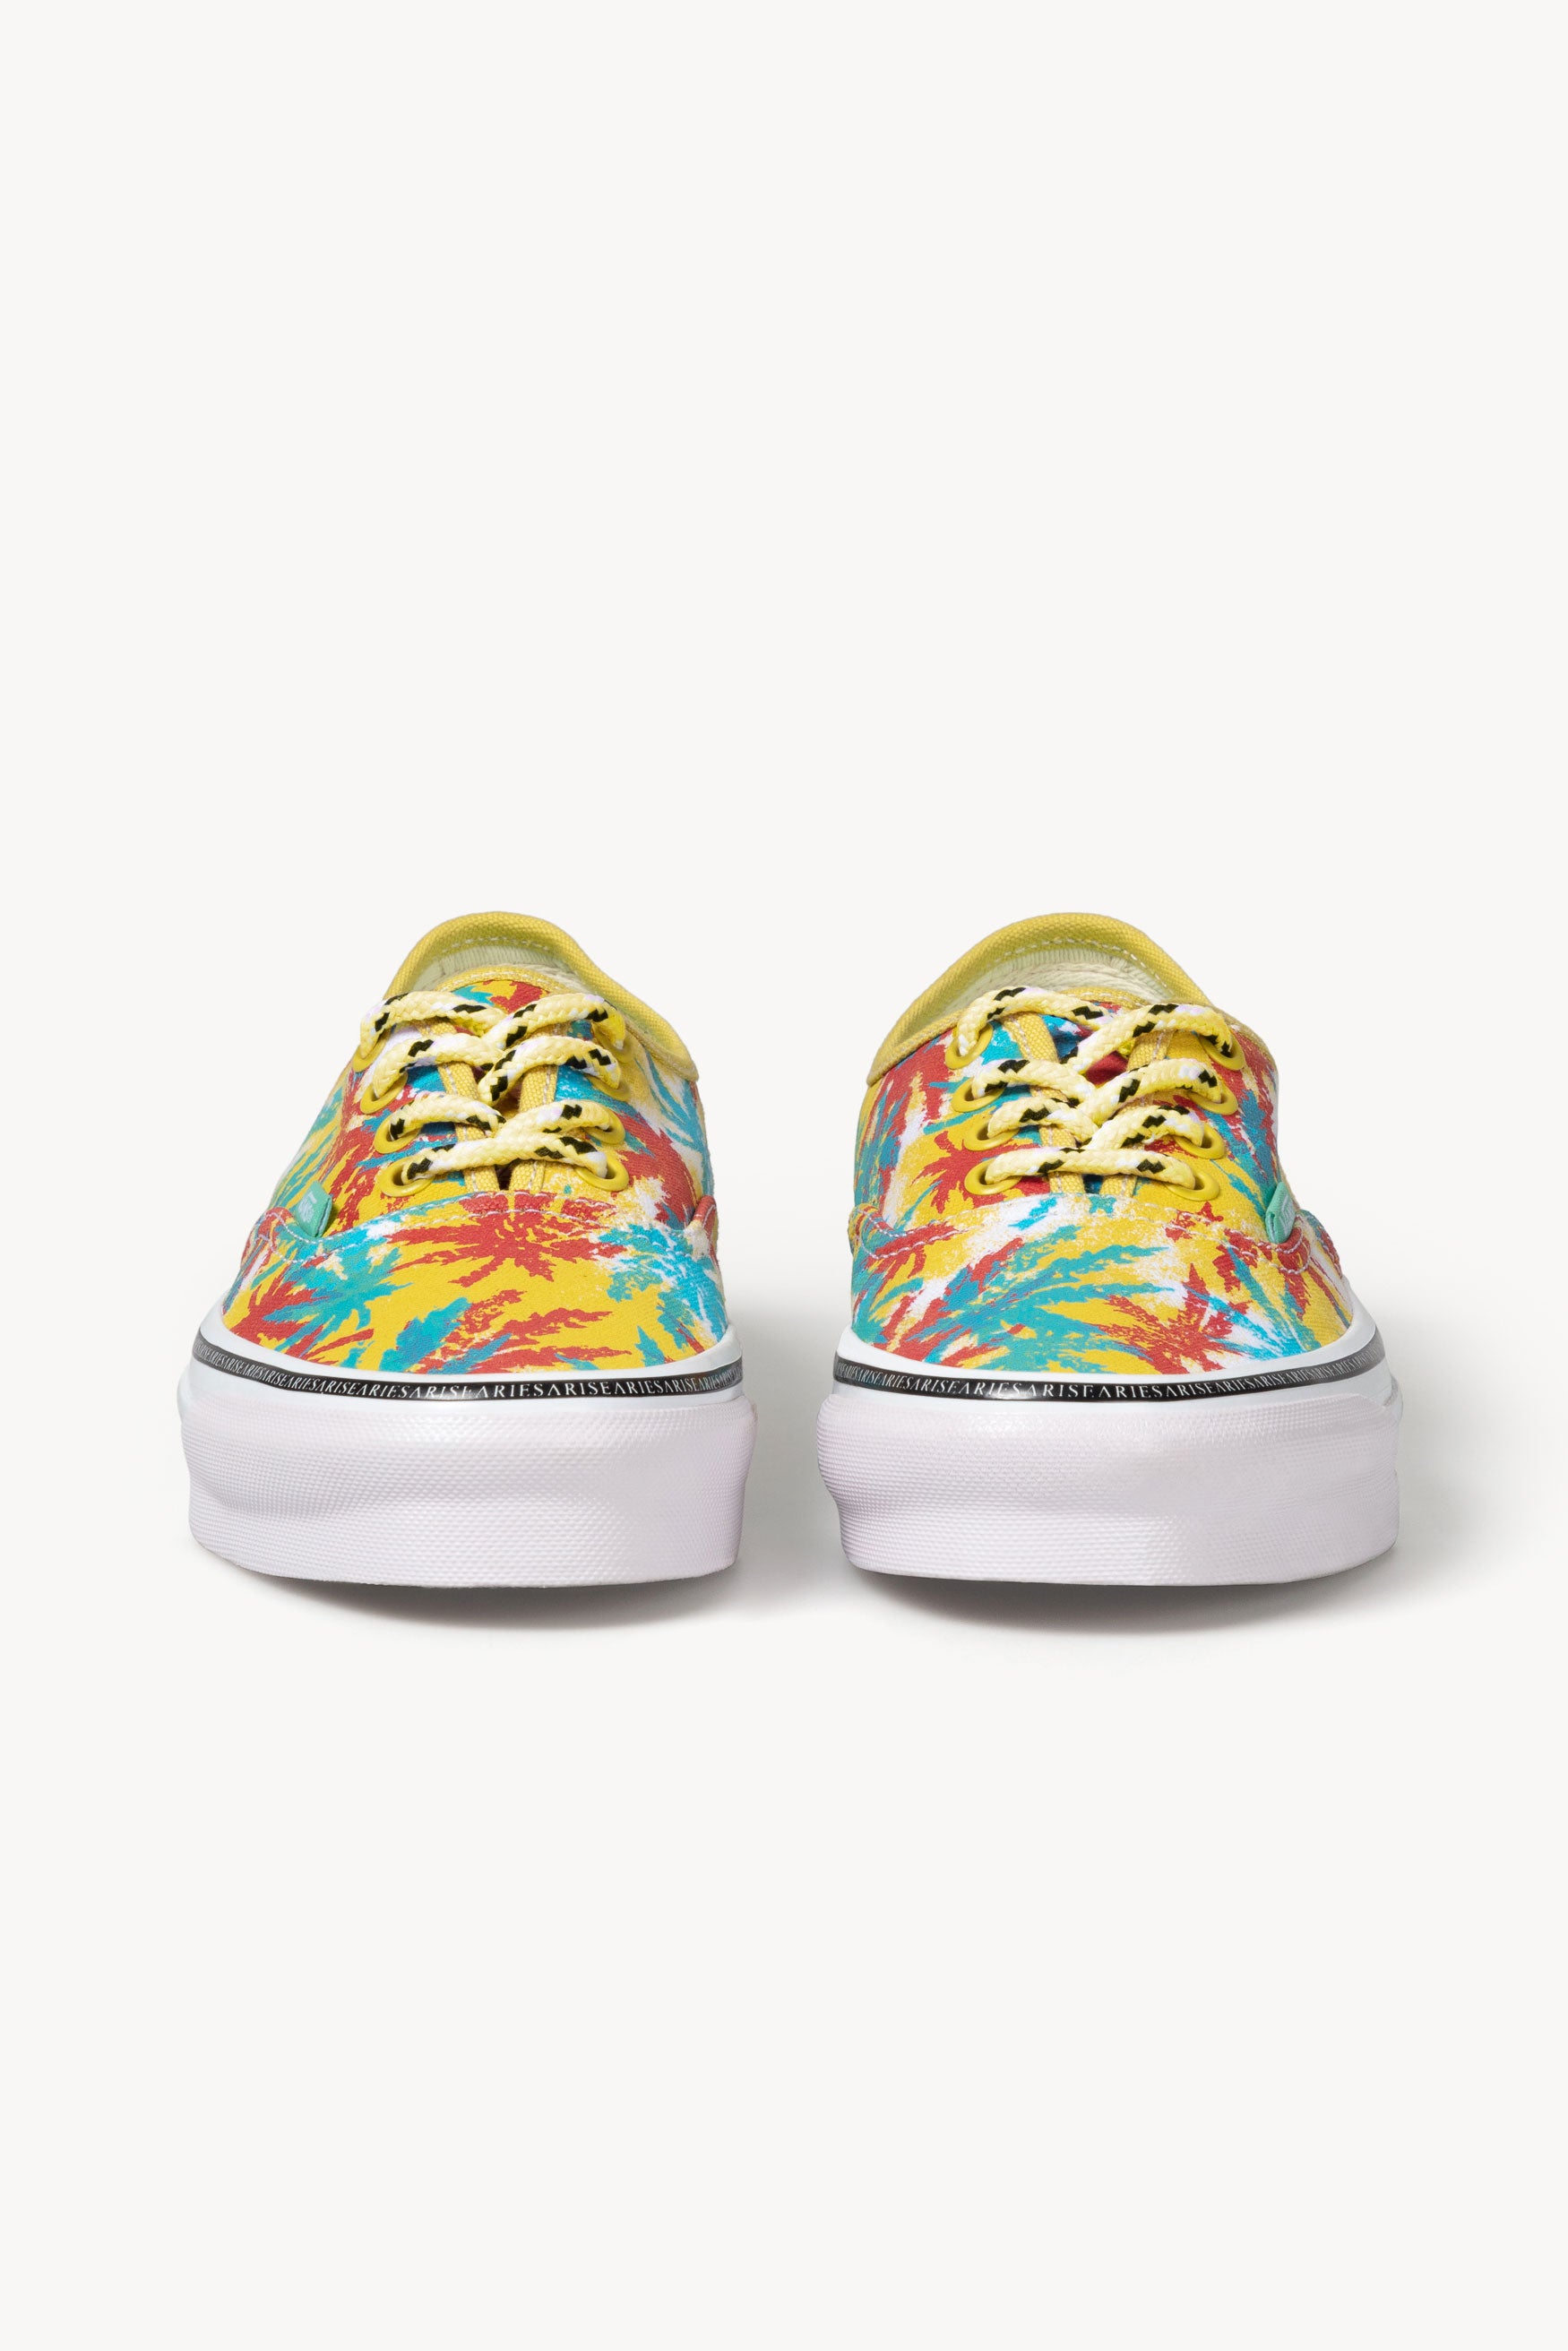 Load image into Gallery viewer, Aries x Vault by Vans Weed OG Authentic LX